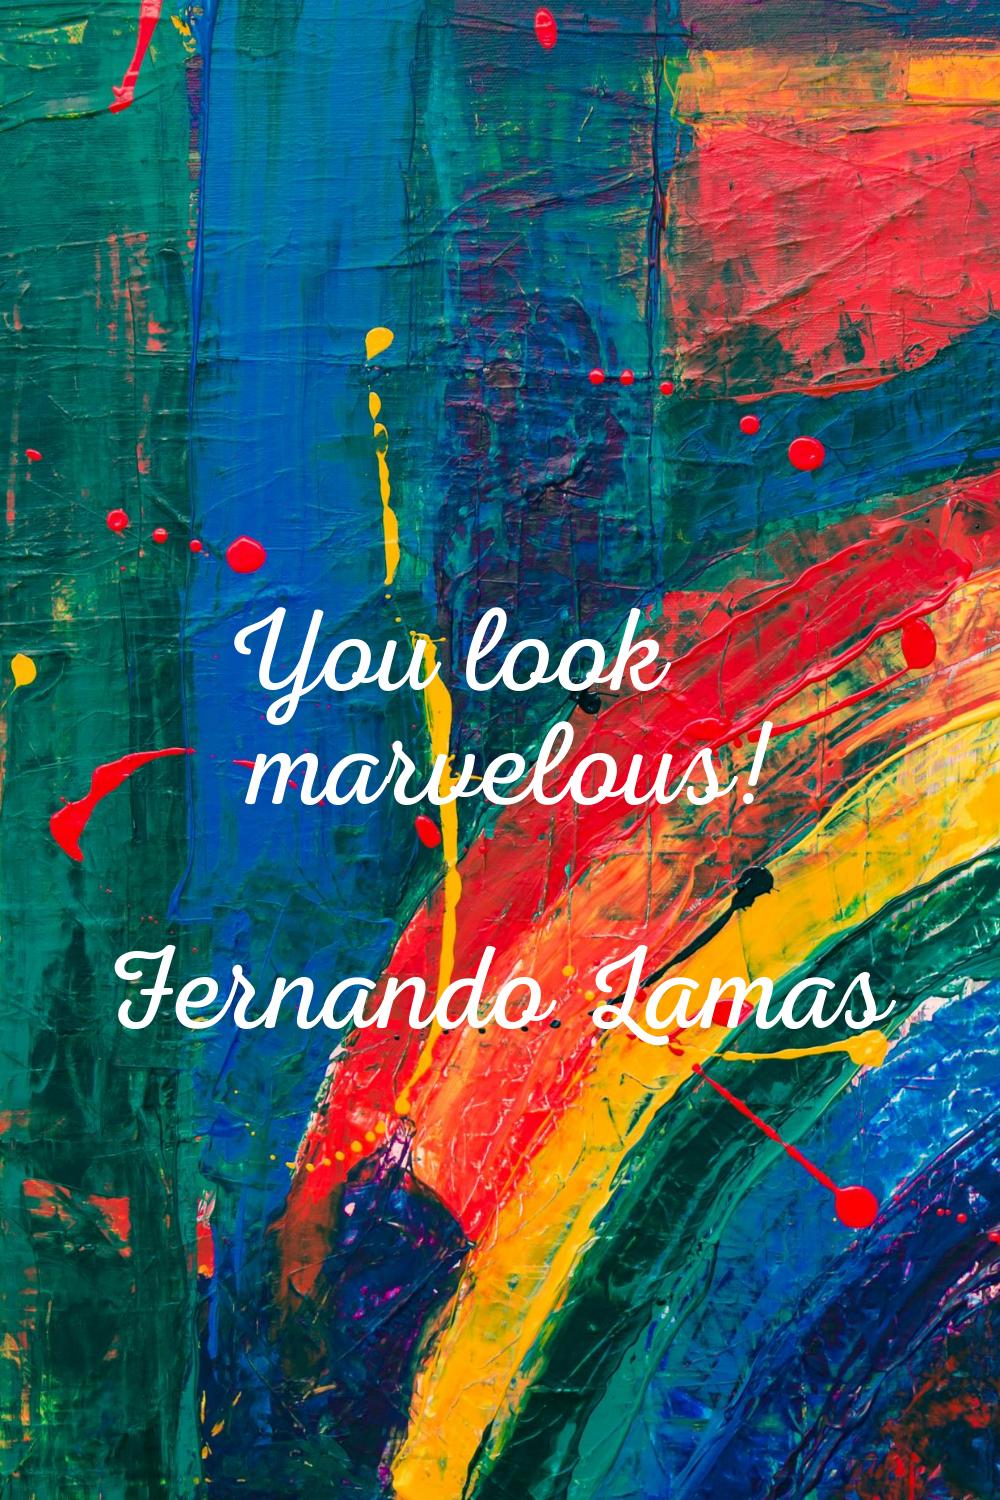 You look marvelous!